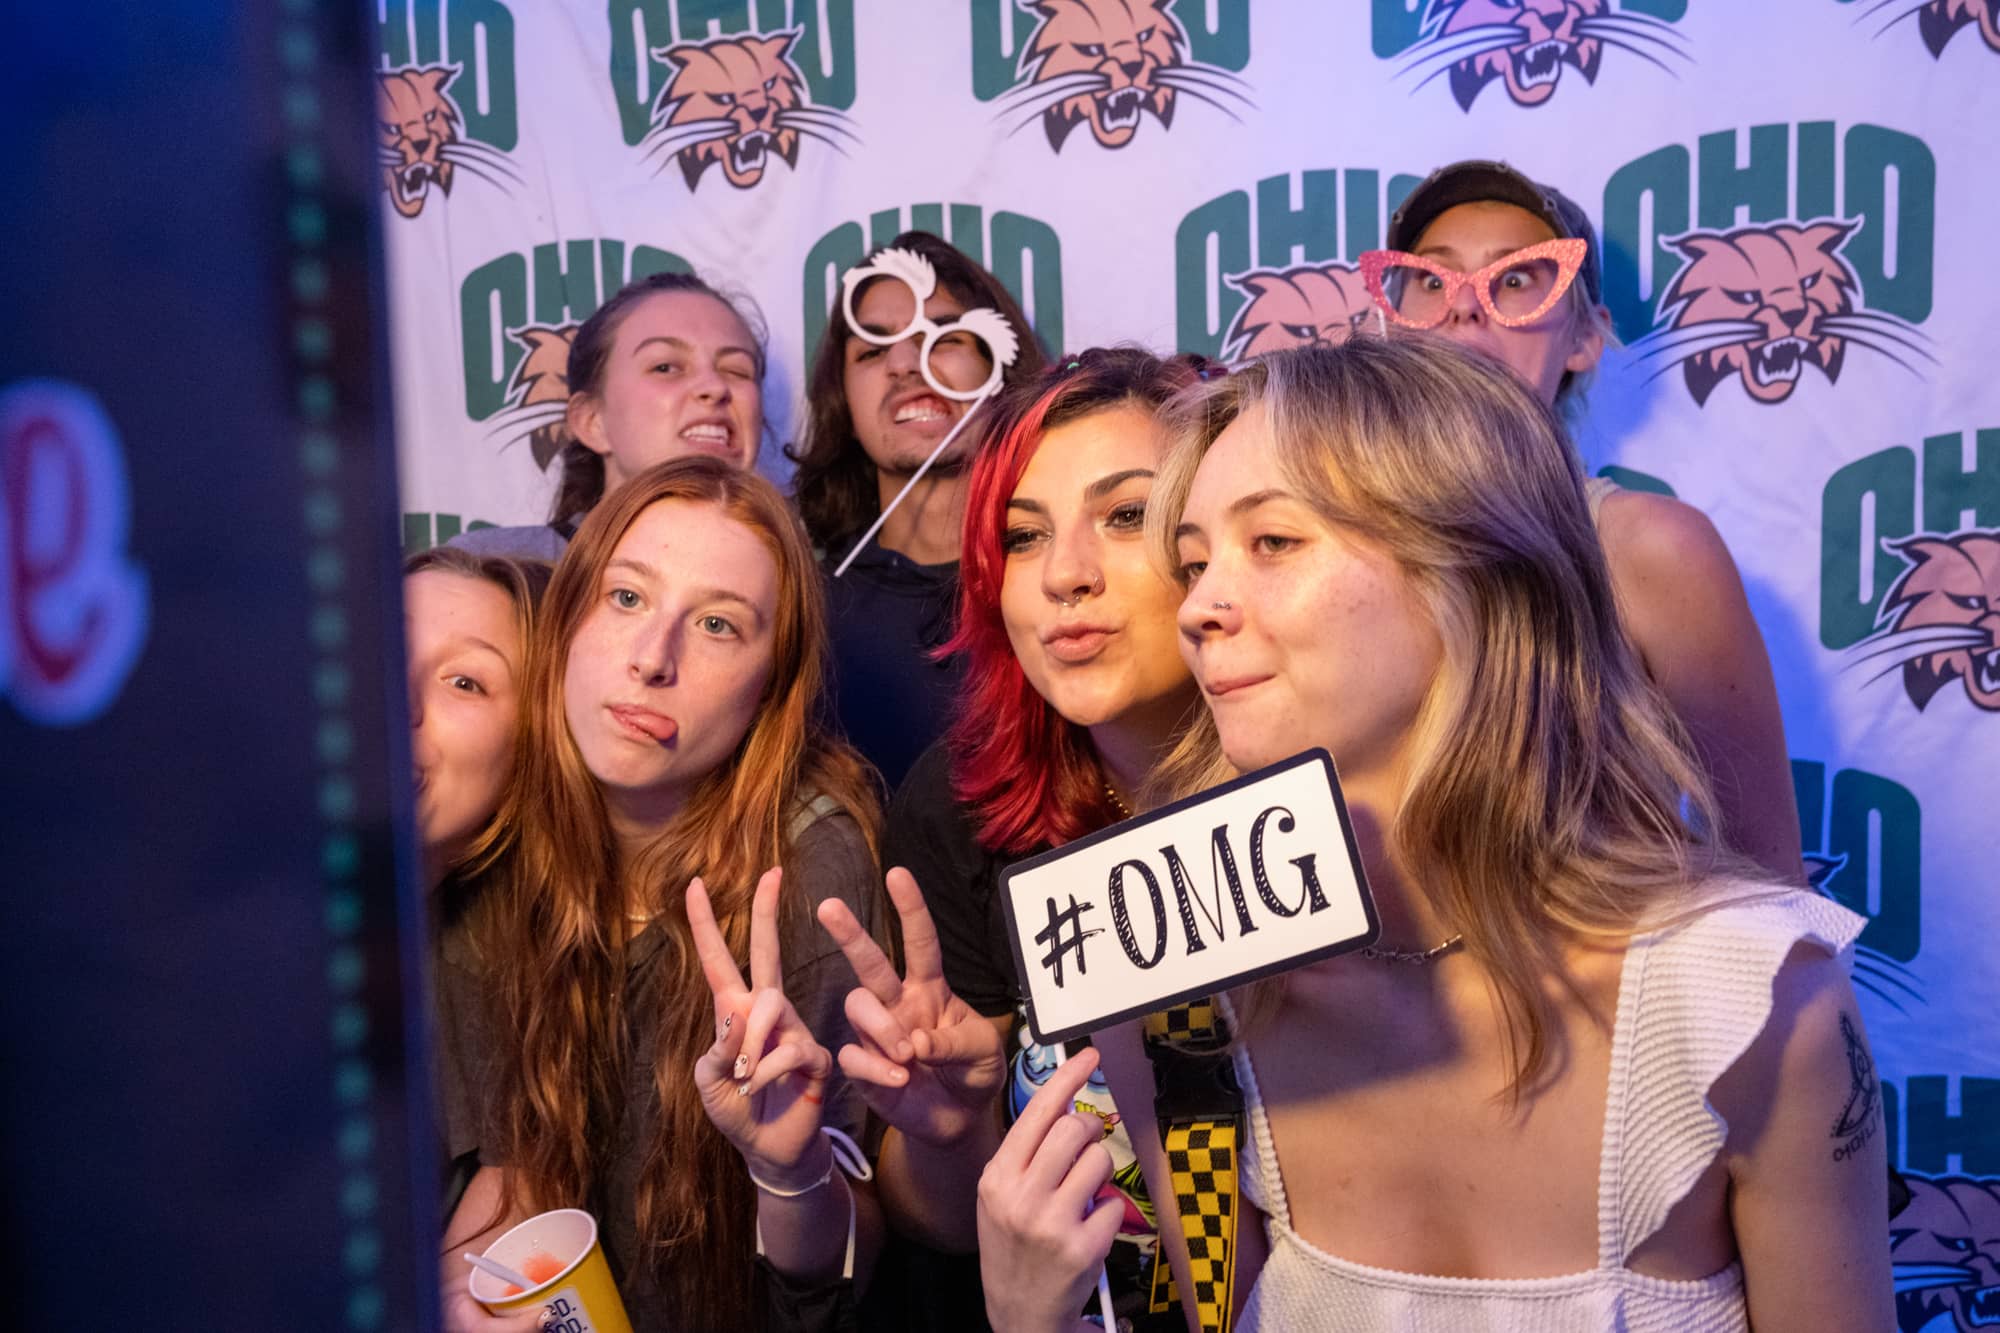 Students pose for a photo together in photo booth at a Yard Games event night on South Green.